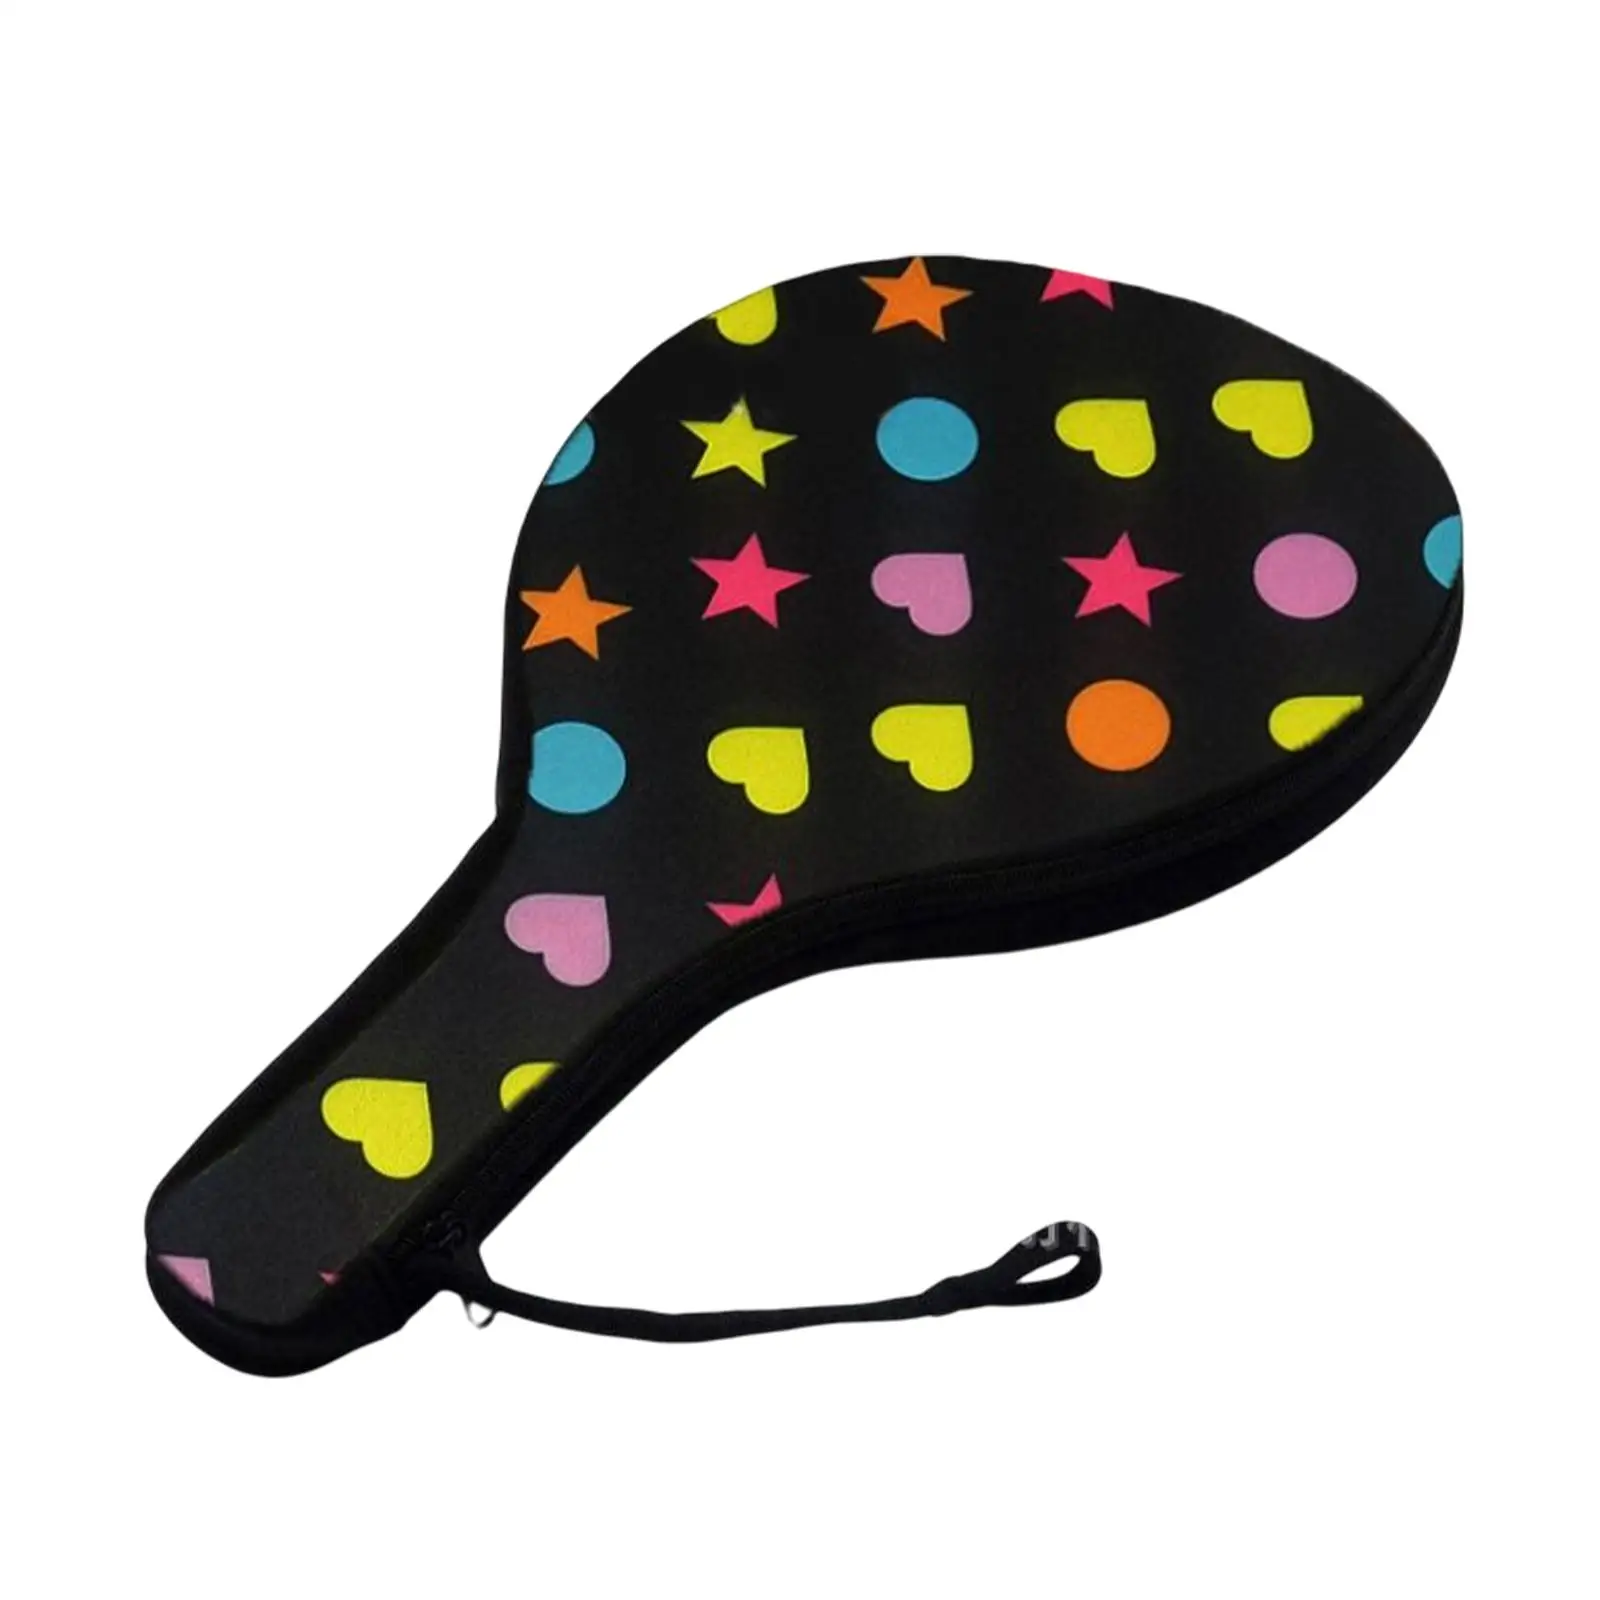 Neoprene Pickleball Paddle Bag Racket Case Cover Storage Carrier Storage Protective Sleeve Zipper Pouch Holder Accessories Gift